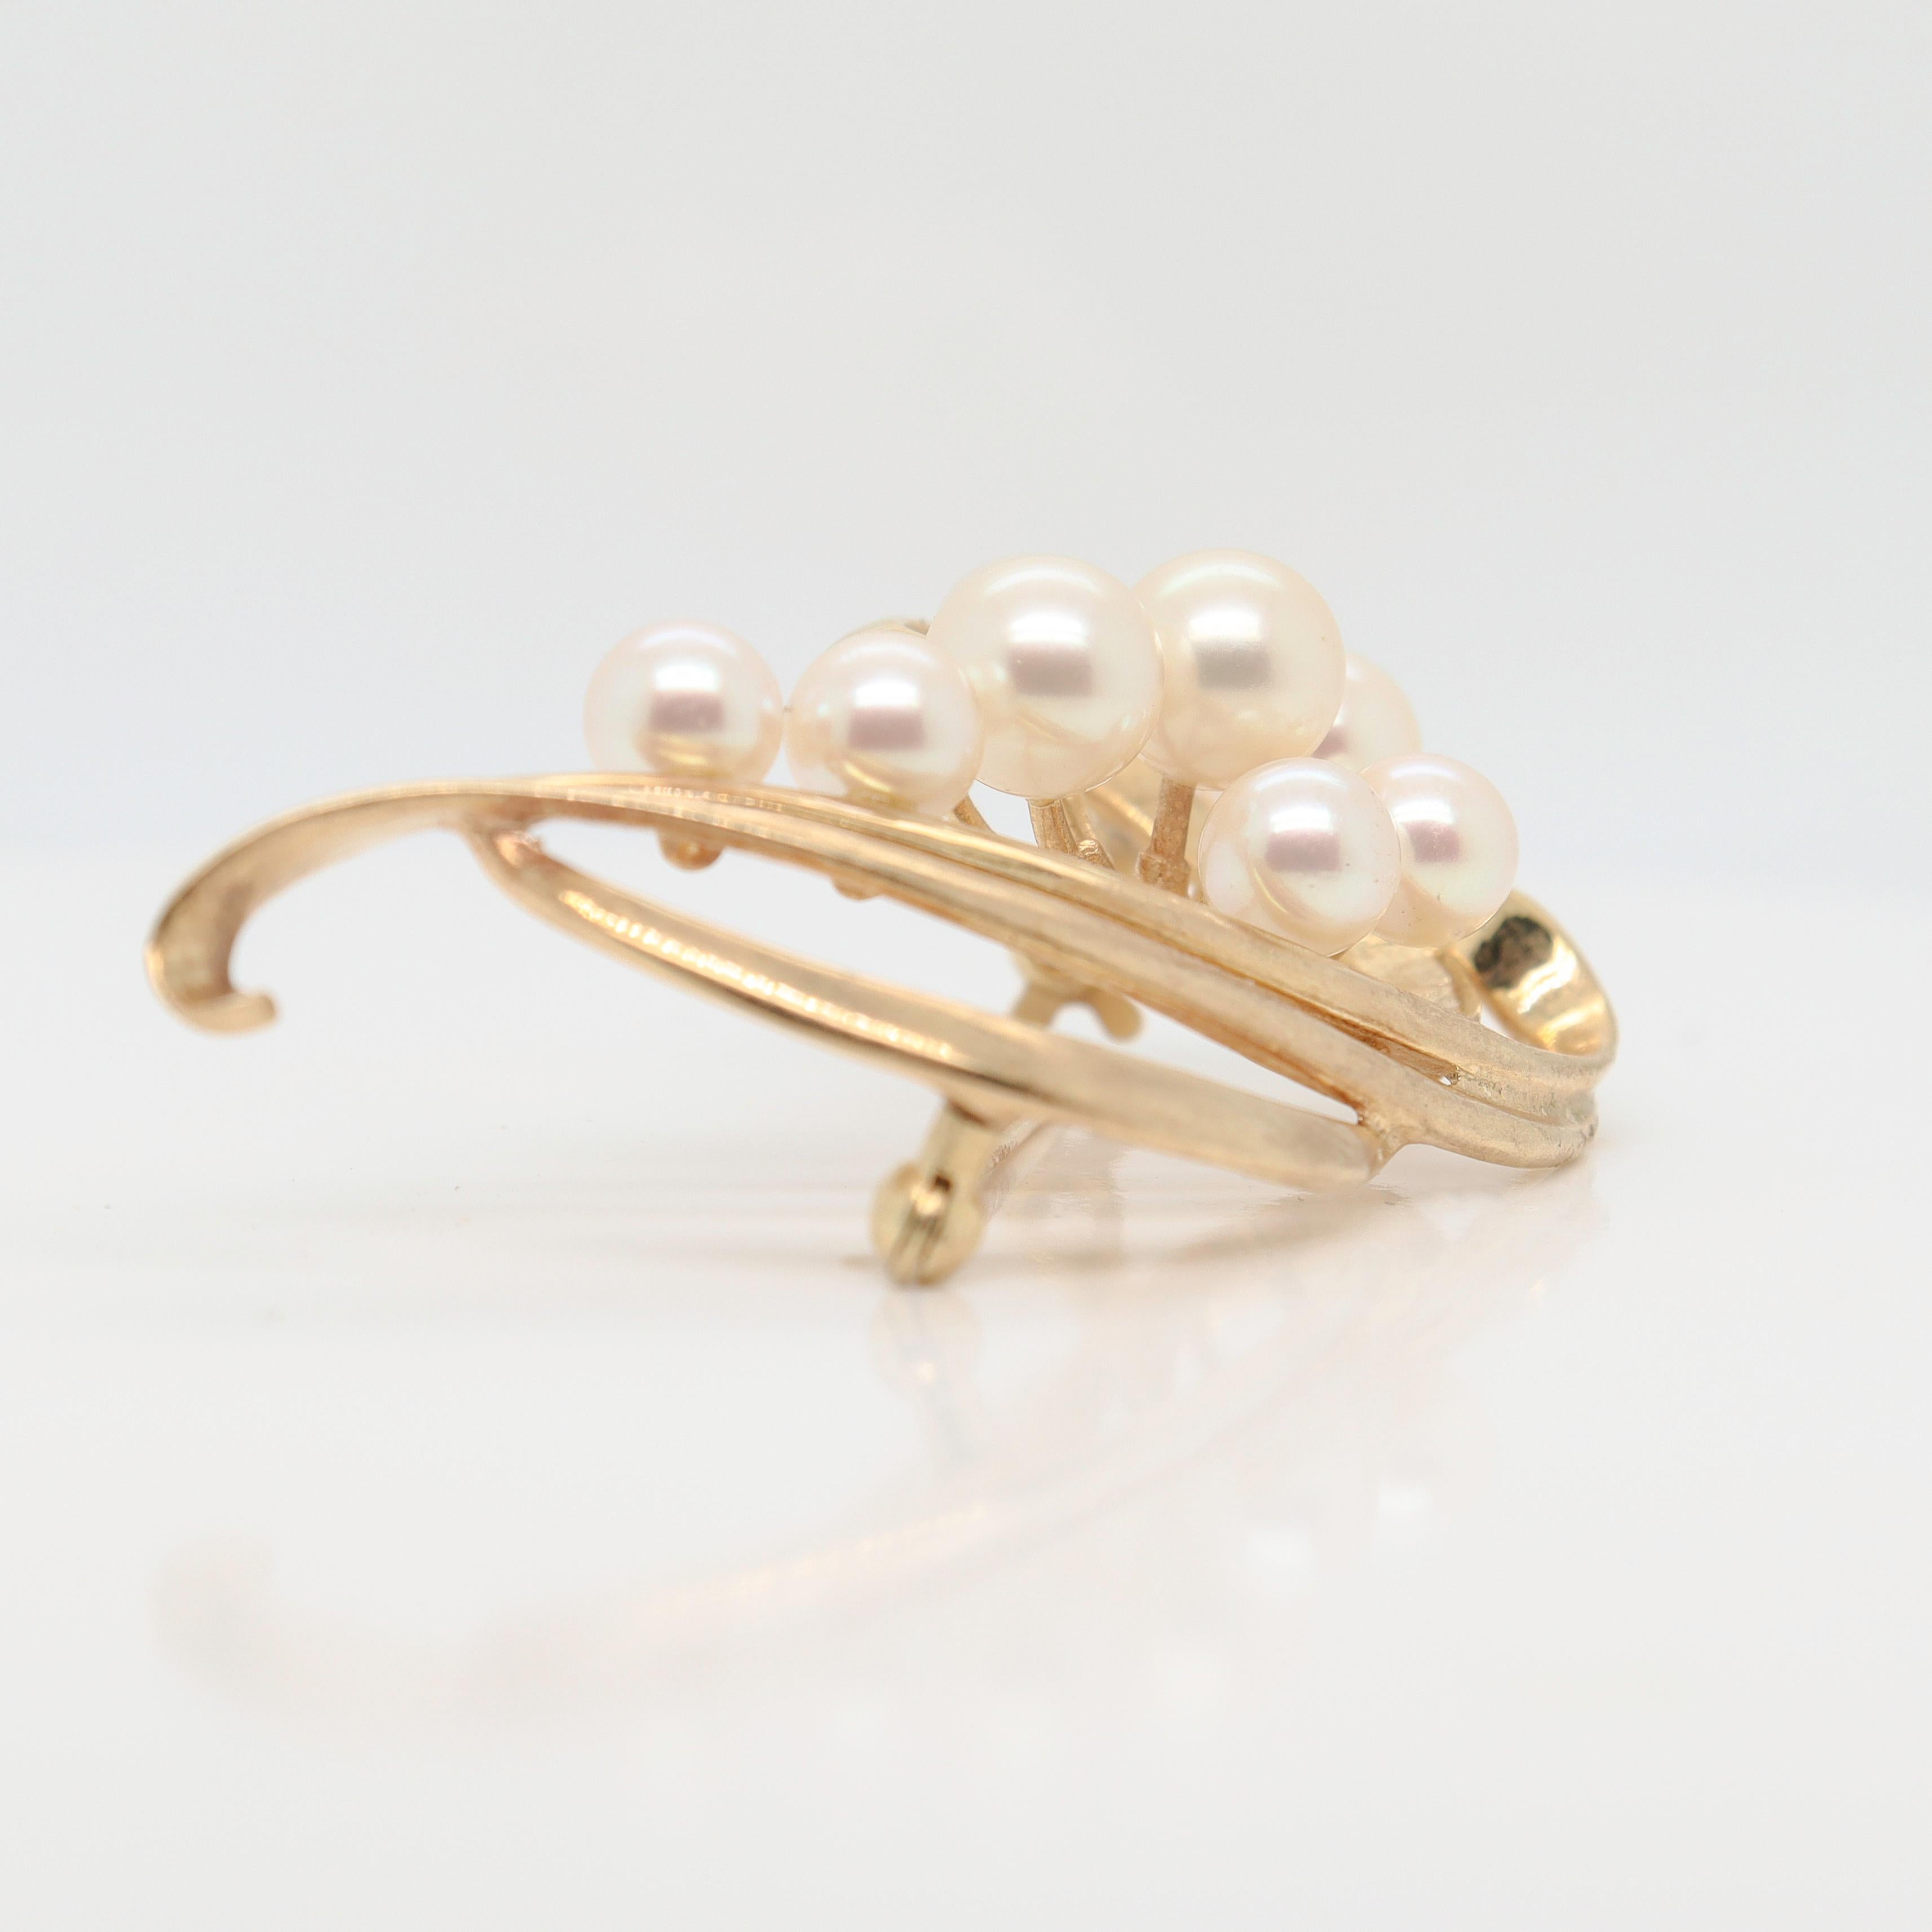 Mikimoto Modernist 14k Gold & Akoya Pearl Brooch or Pin For Sale 2